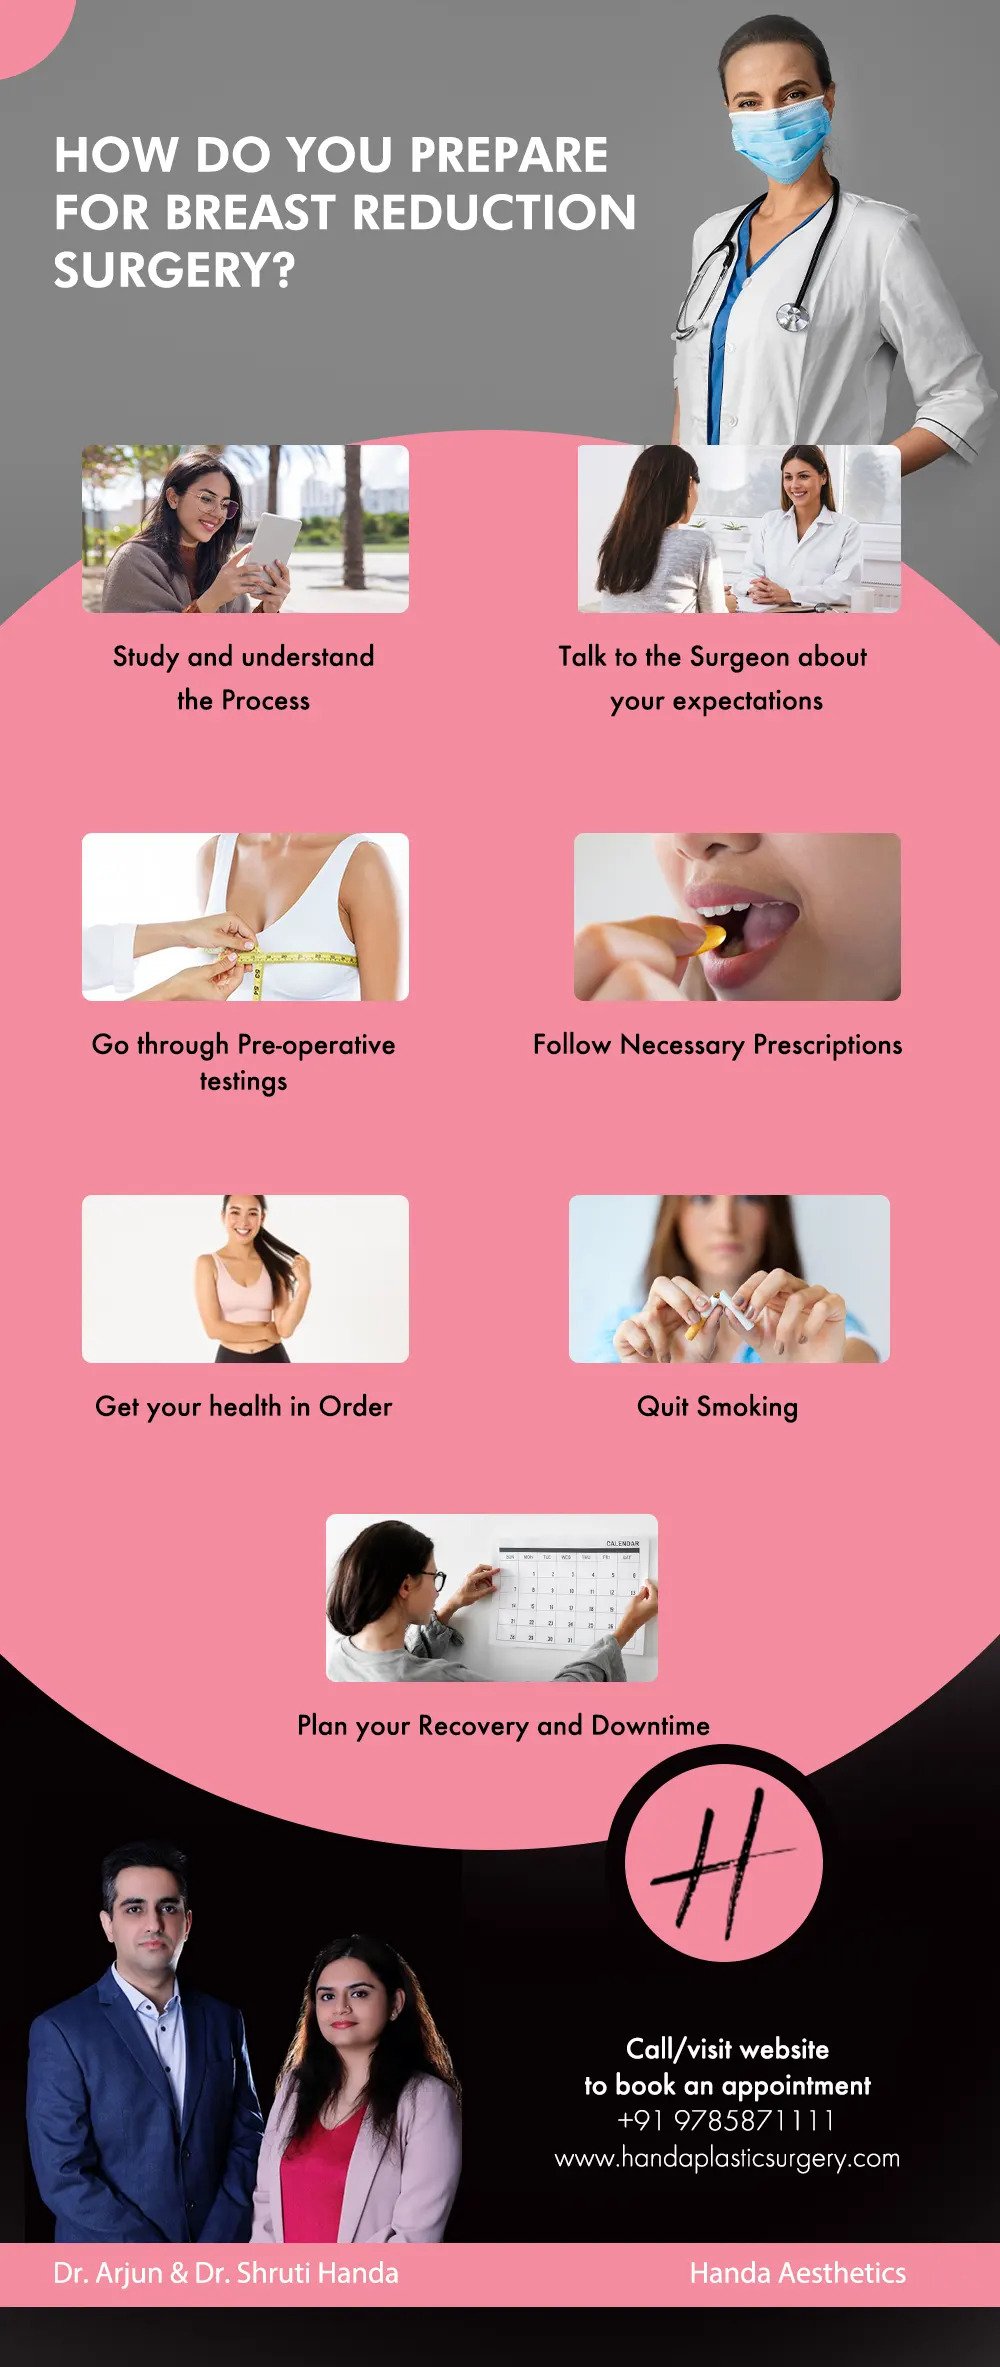 How do you prepare for Breast Reduction Surgery